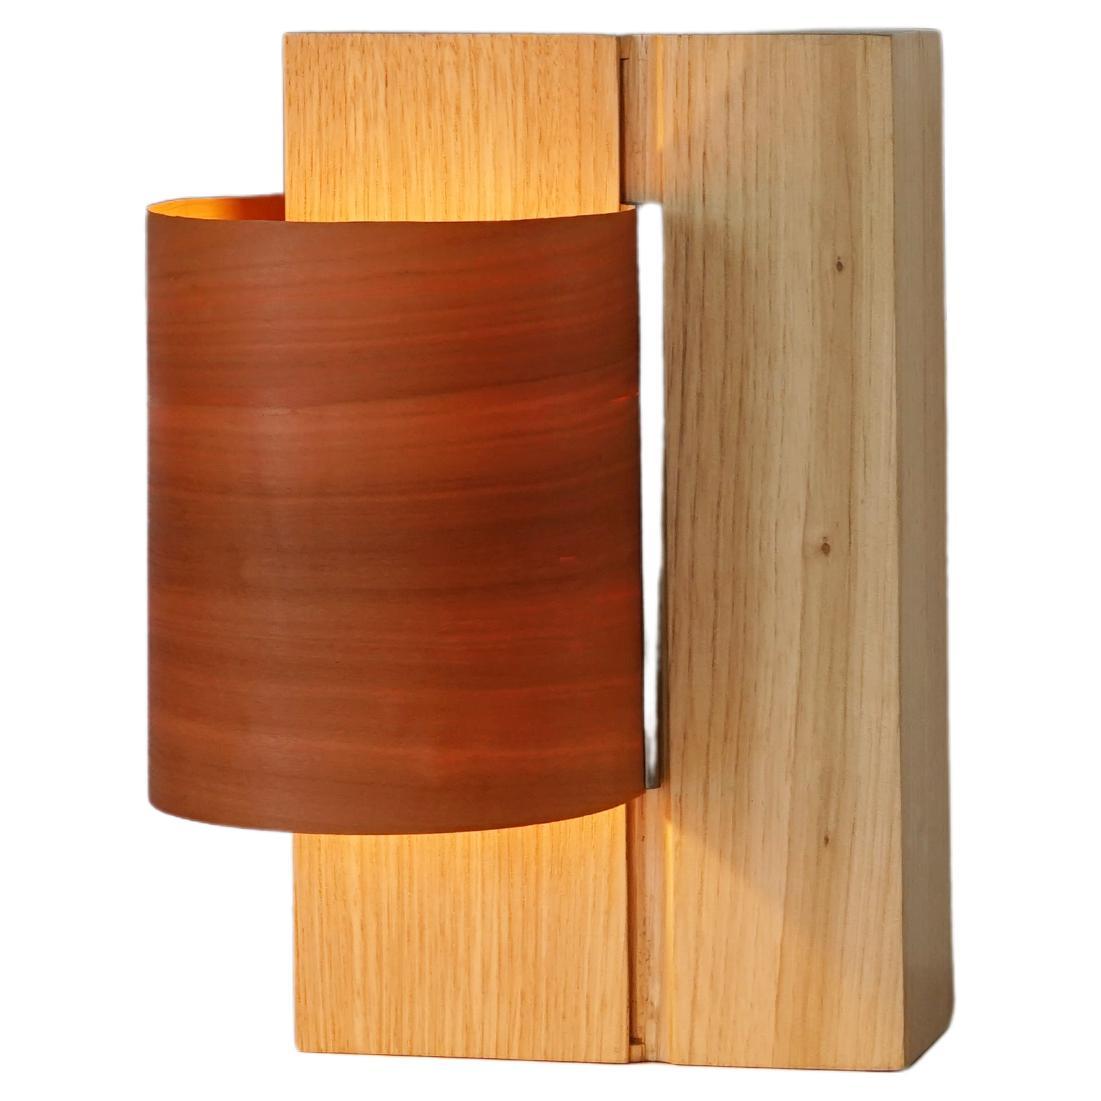 Table Lamp 6/10, Oak and Pear Wood, Handmade in France, OROS Edition For Sale